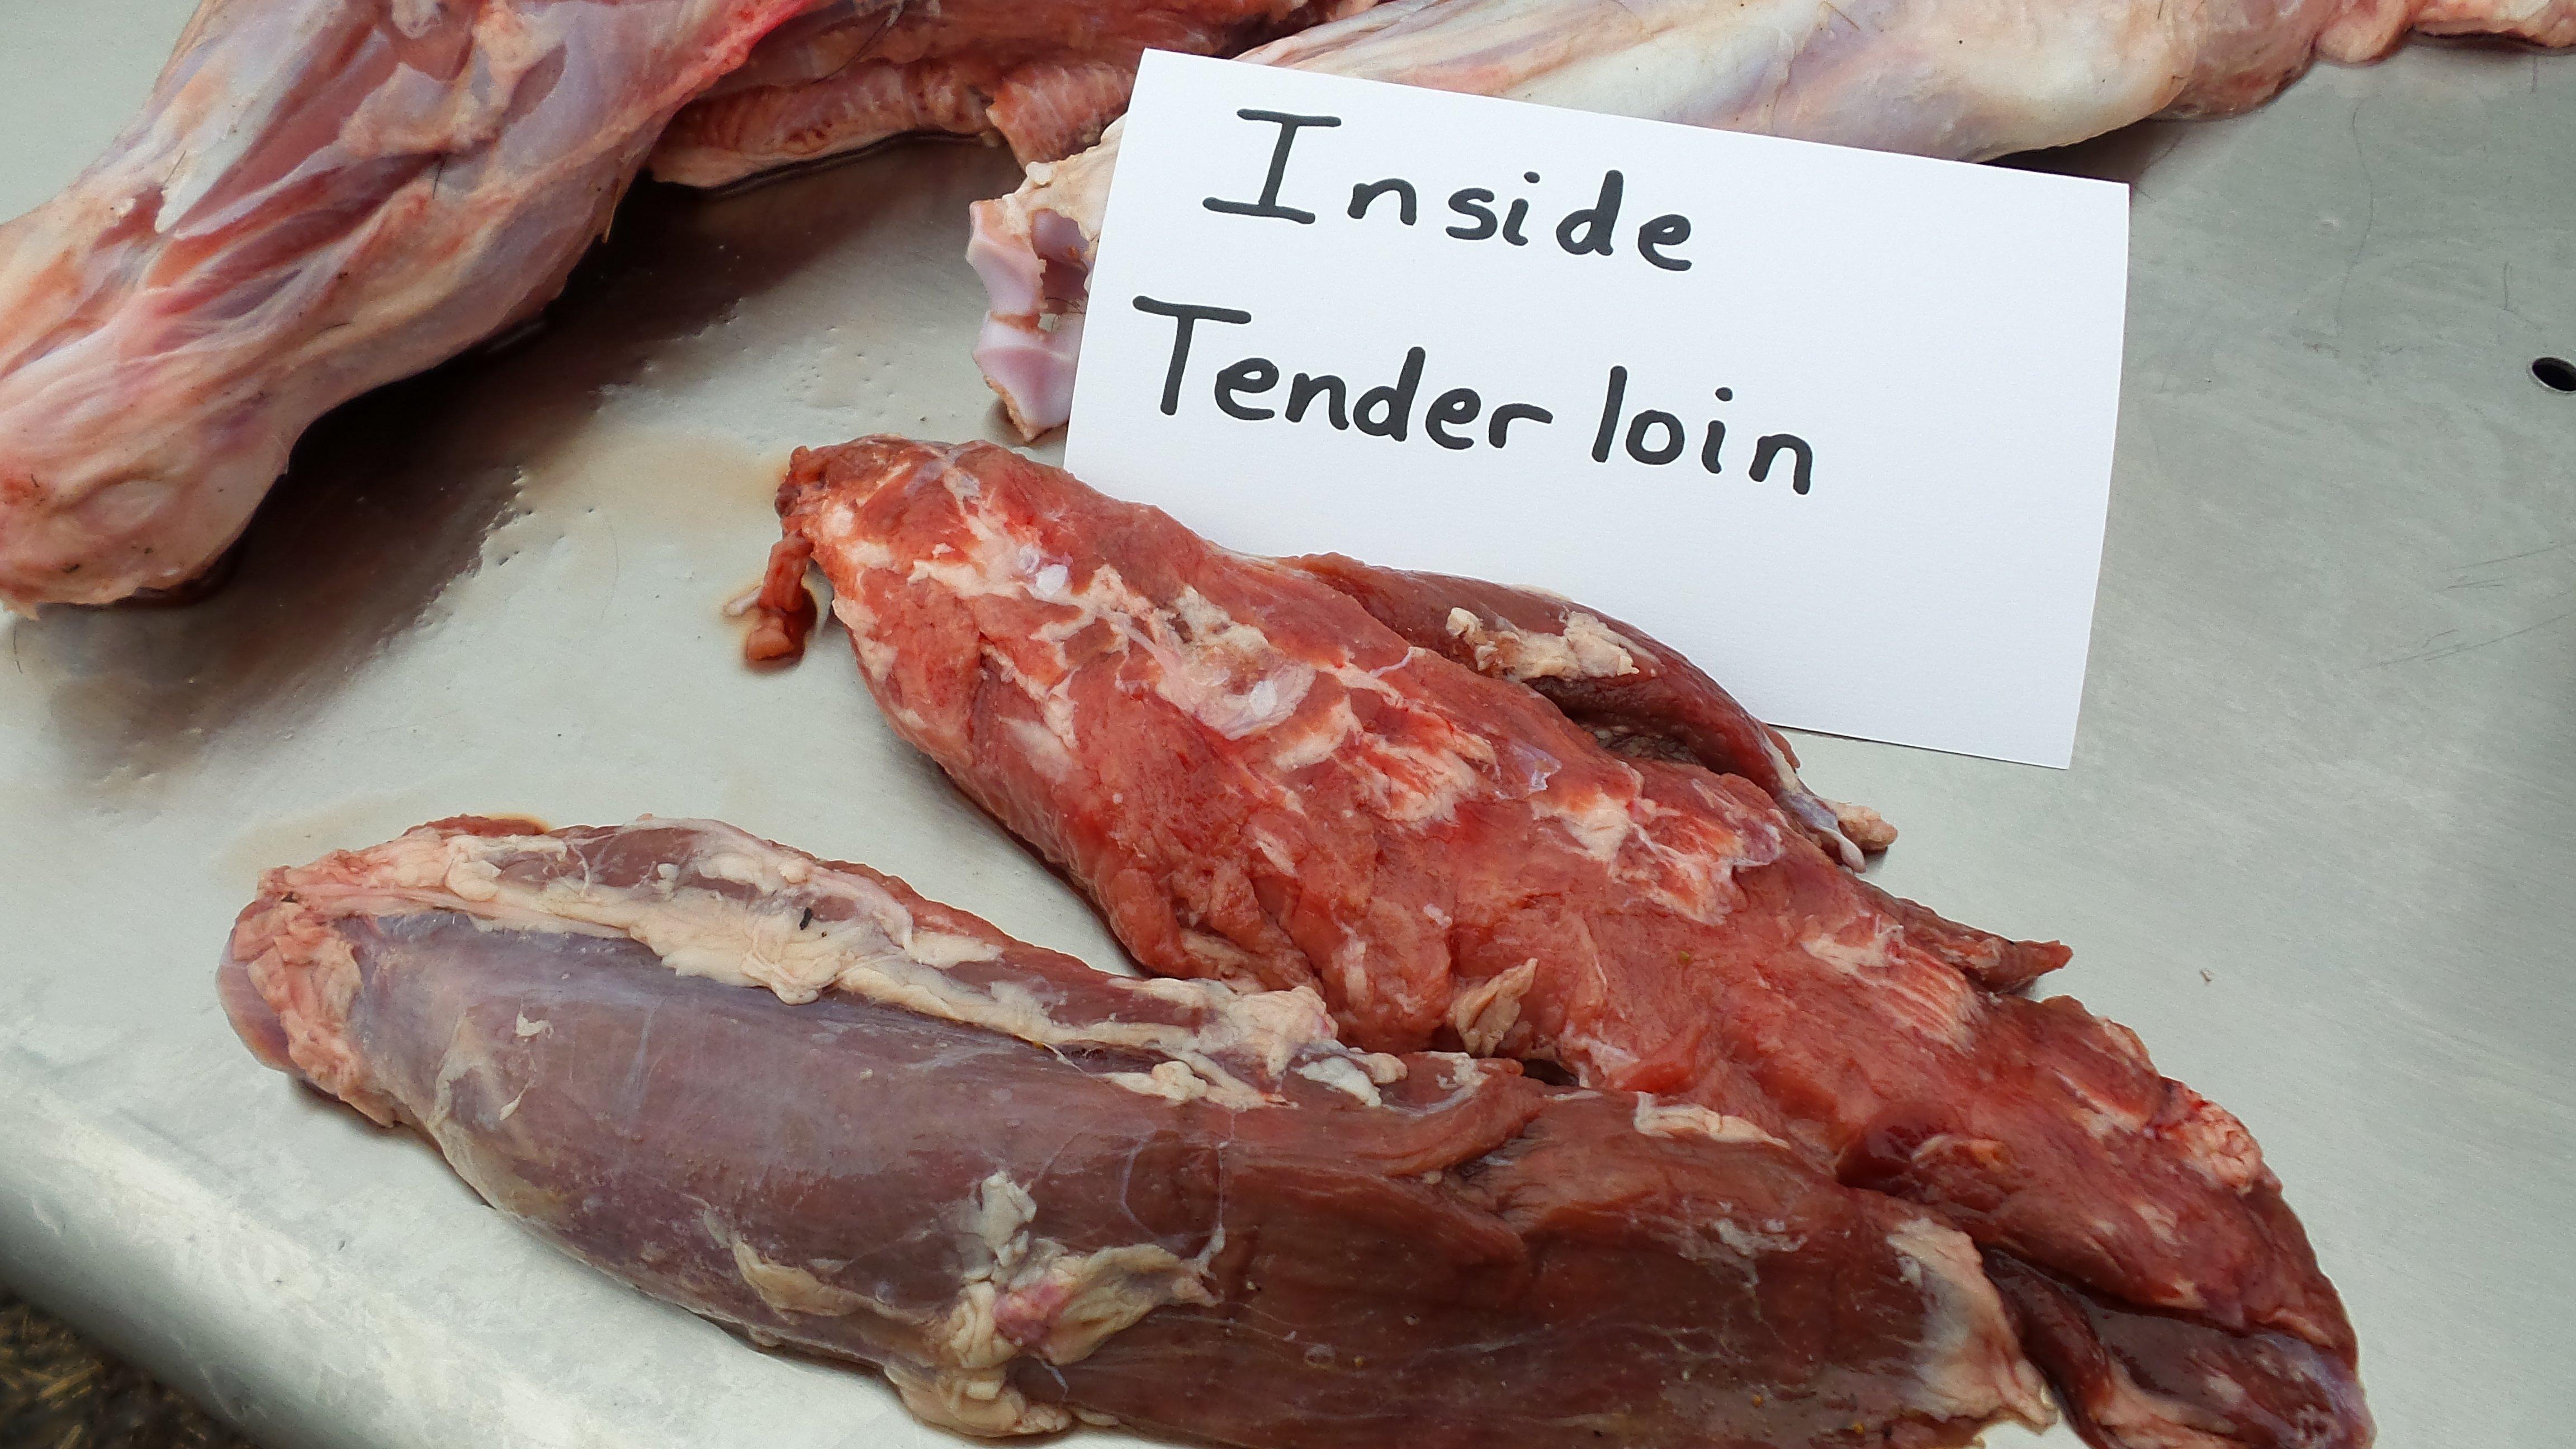 Although small, inside tenderloins are tender and tasty.